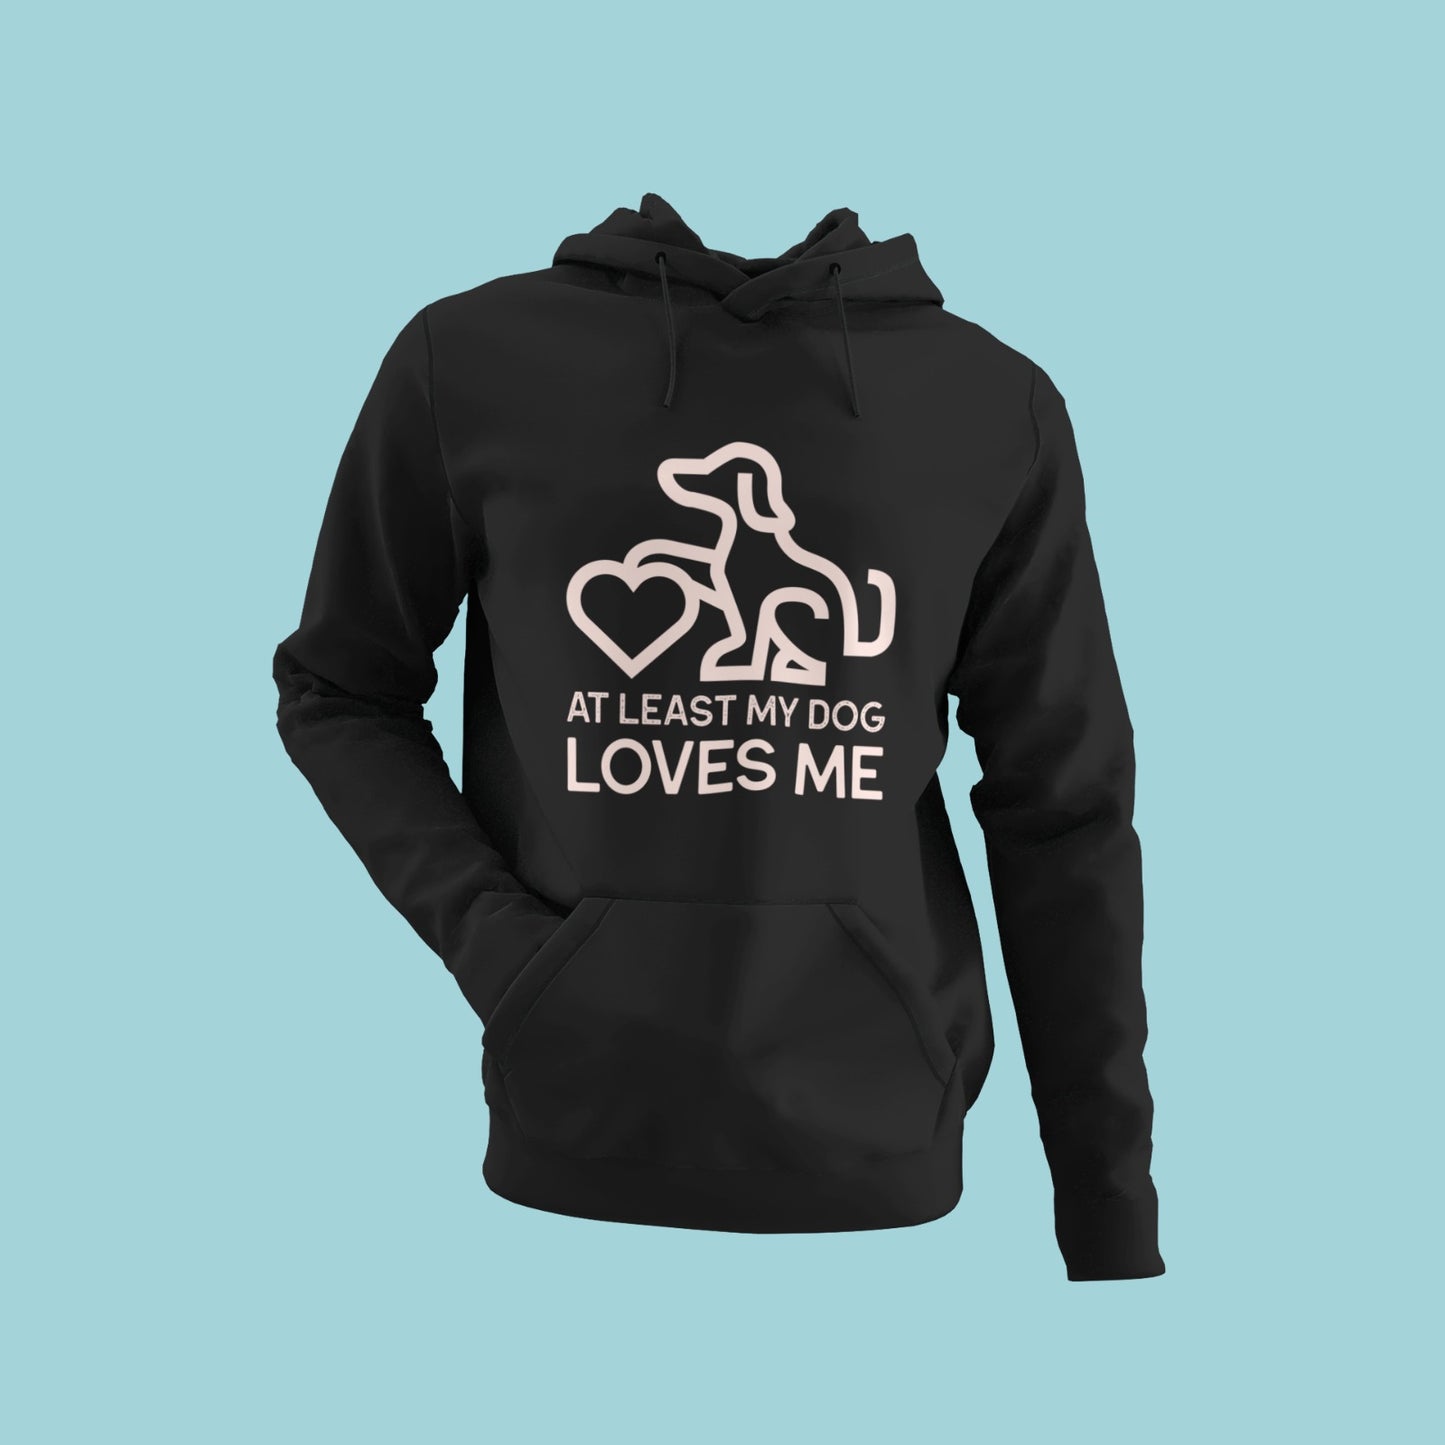 Express your love for your furry best friend with this black hoodie featuring a line drawing of a sitting dog with one paw on a heart and the slogan "at least my dog loves me". The comfortable material and eye-catching design make it perfect for everyday wear. Order now to add some warmth and love to your wardrobe!